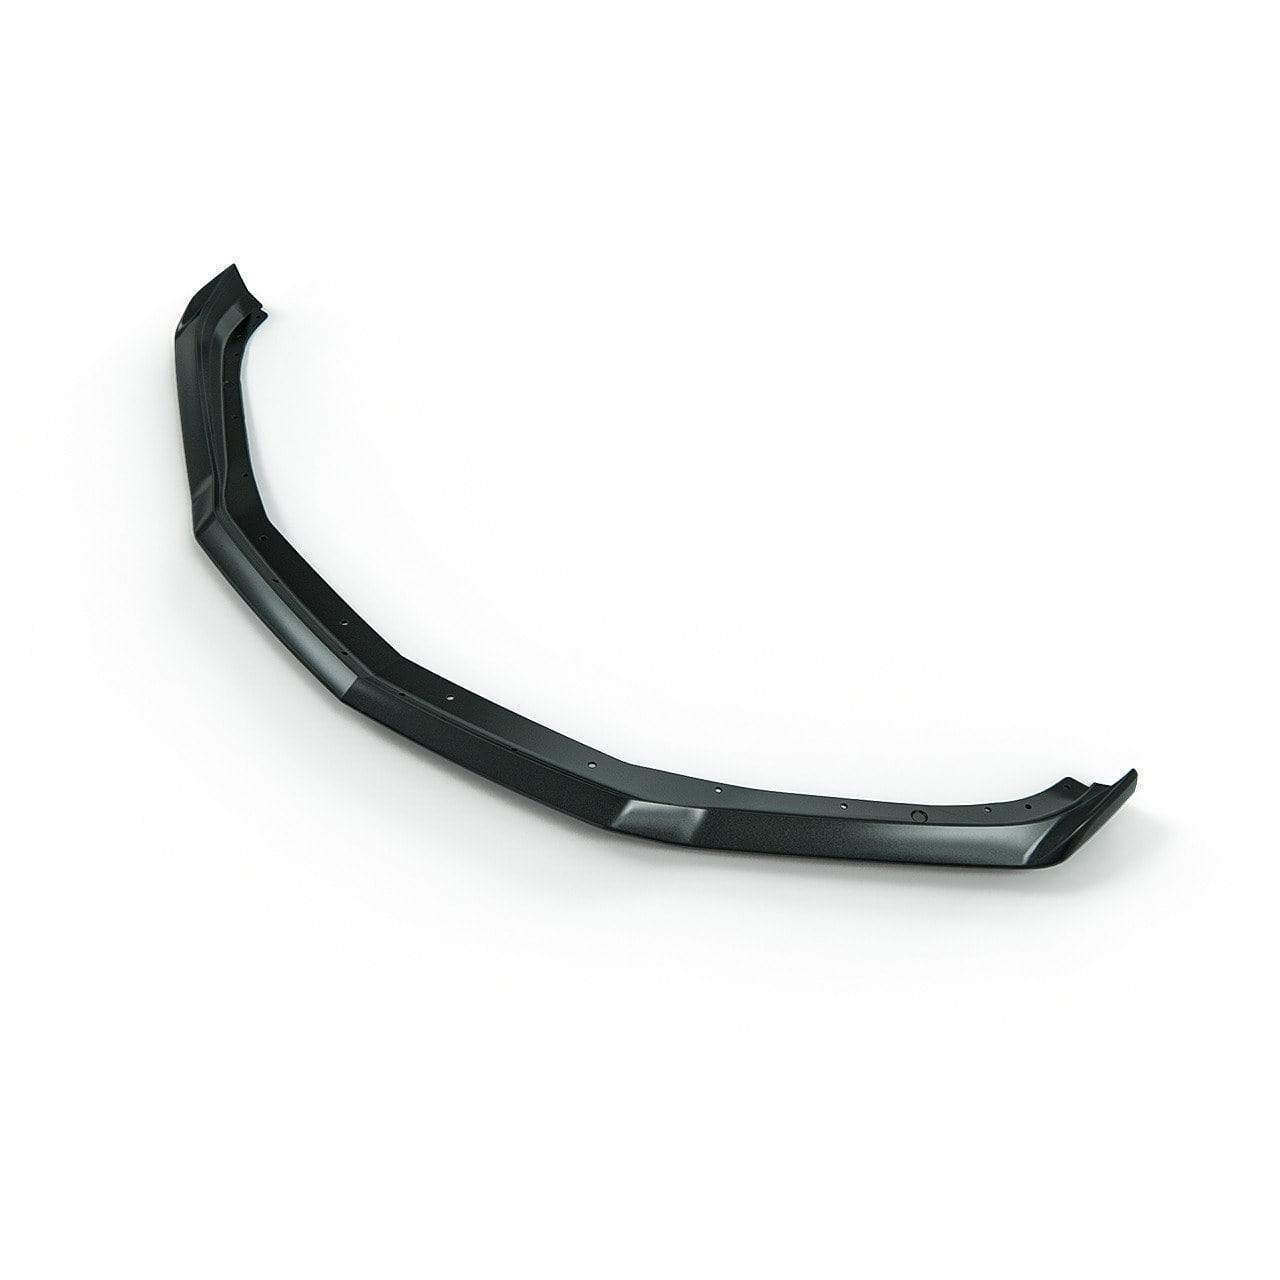 ACS Composite 1LE Front Lip Splitter in Gloss Black for Camaro [48-4-019|48-4-005]GBA - Improves aerodynamics, cooling, and appearance.